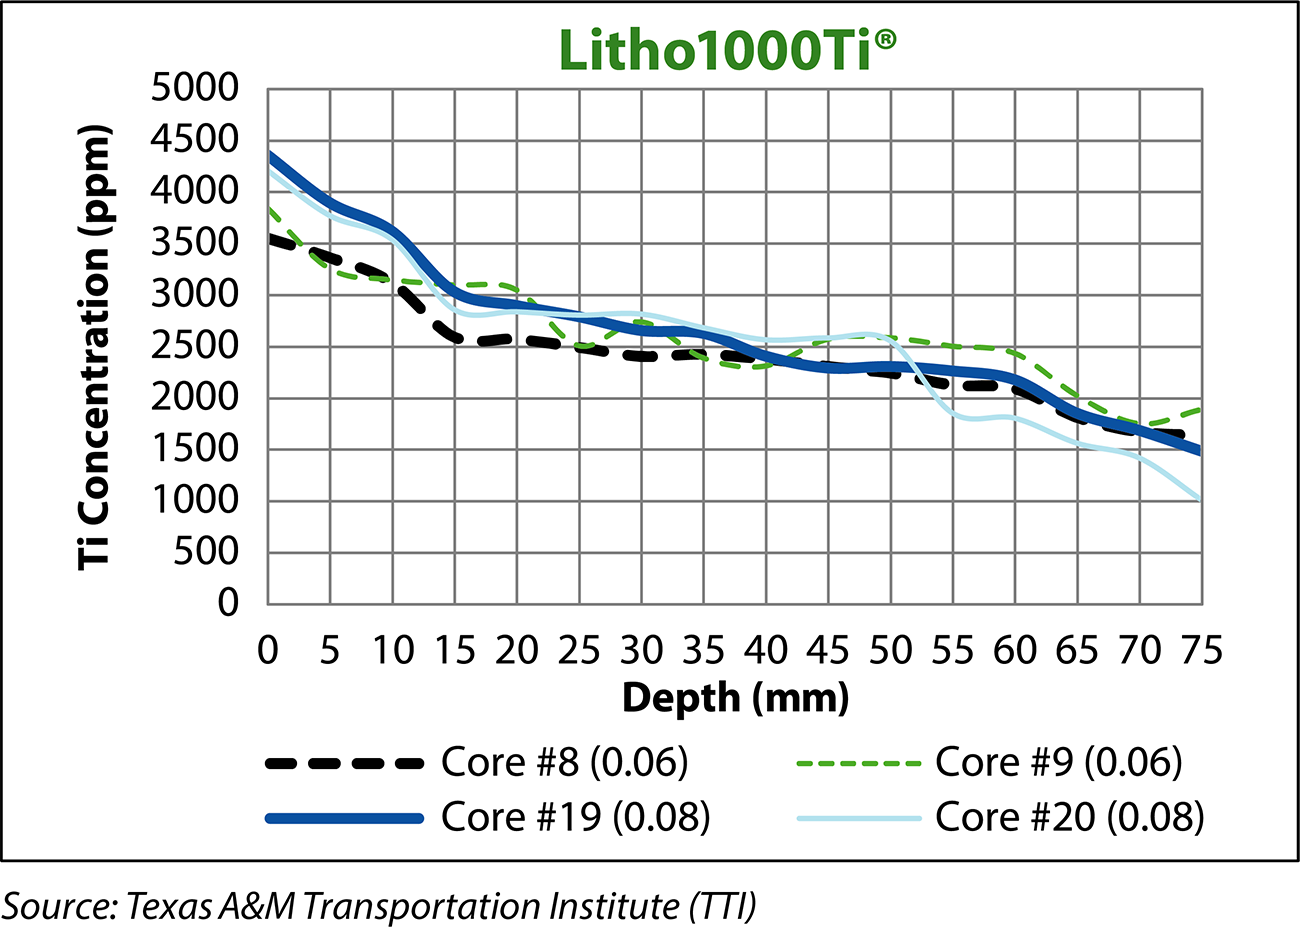 Samples treated with Litho1000Ti concrete sealer/hardener showed both high concentrations of photocatalytic grade TiO2 at the surface and well below wearing-course depth.